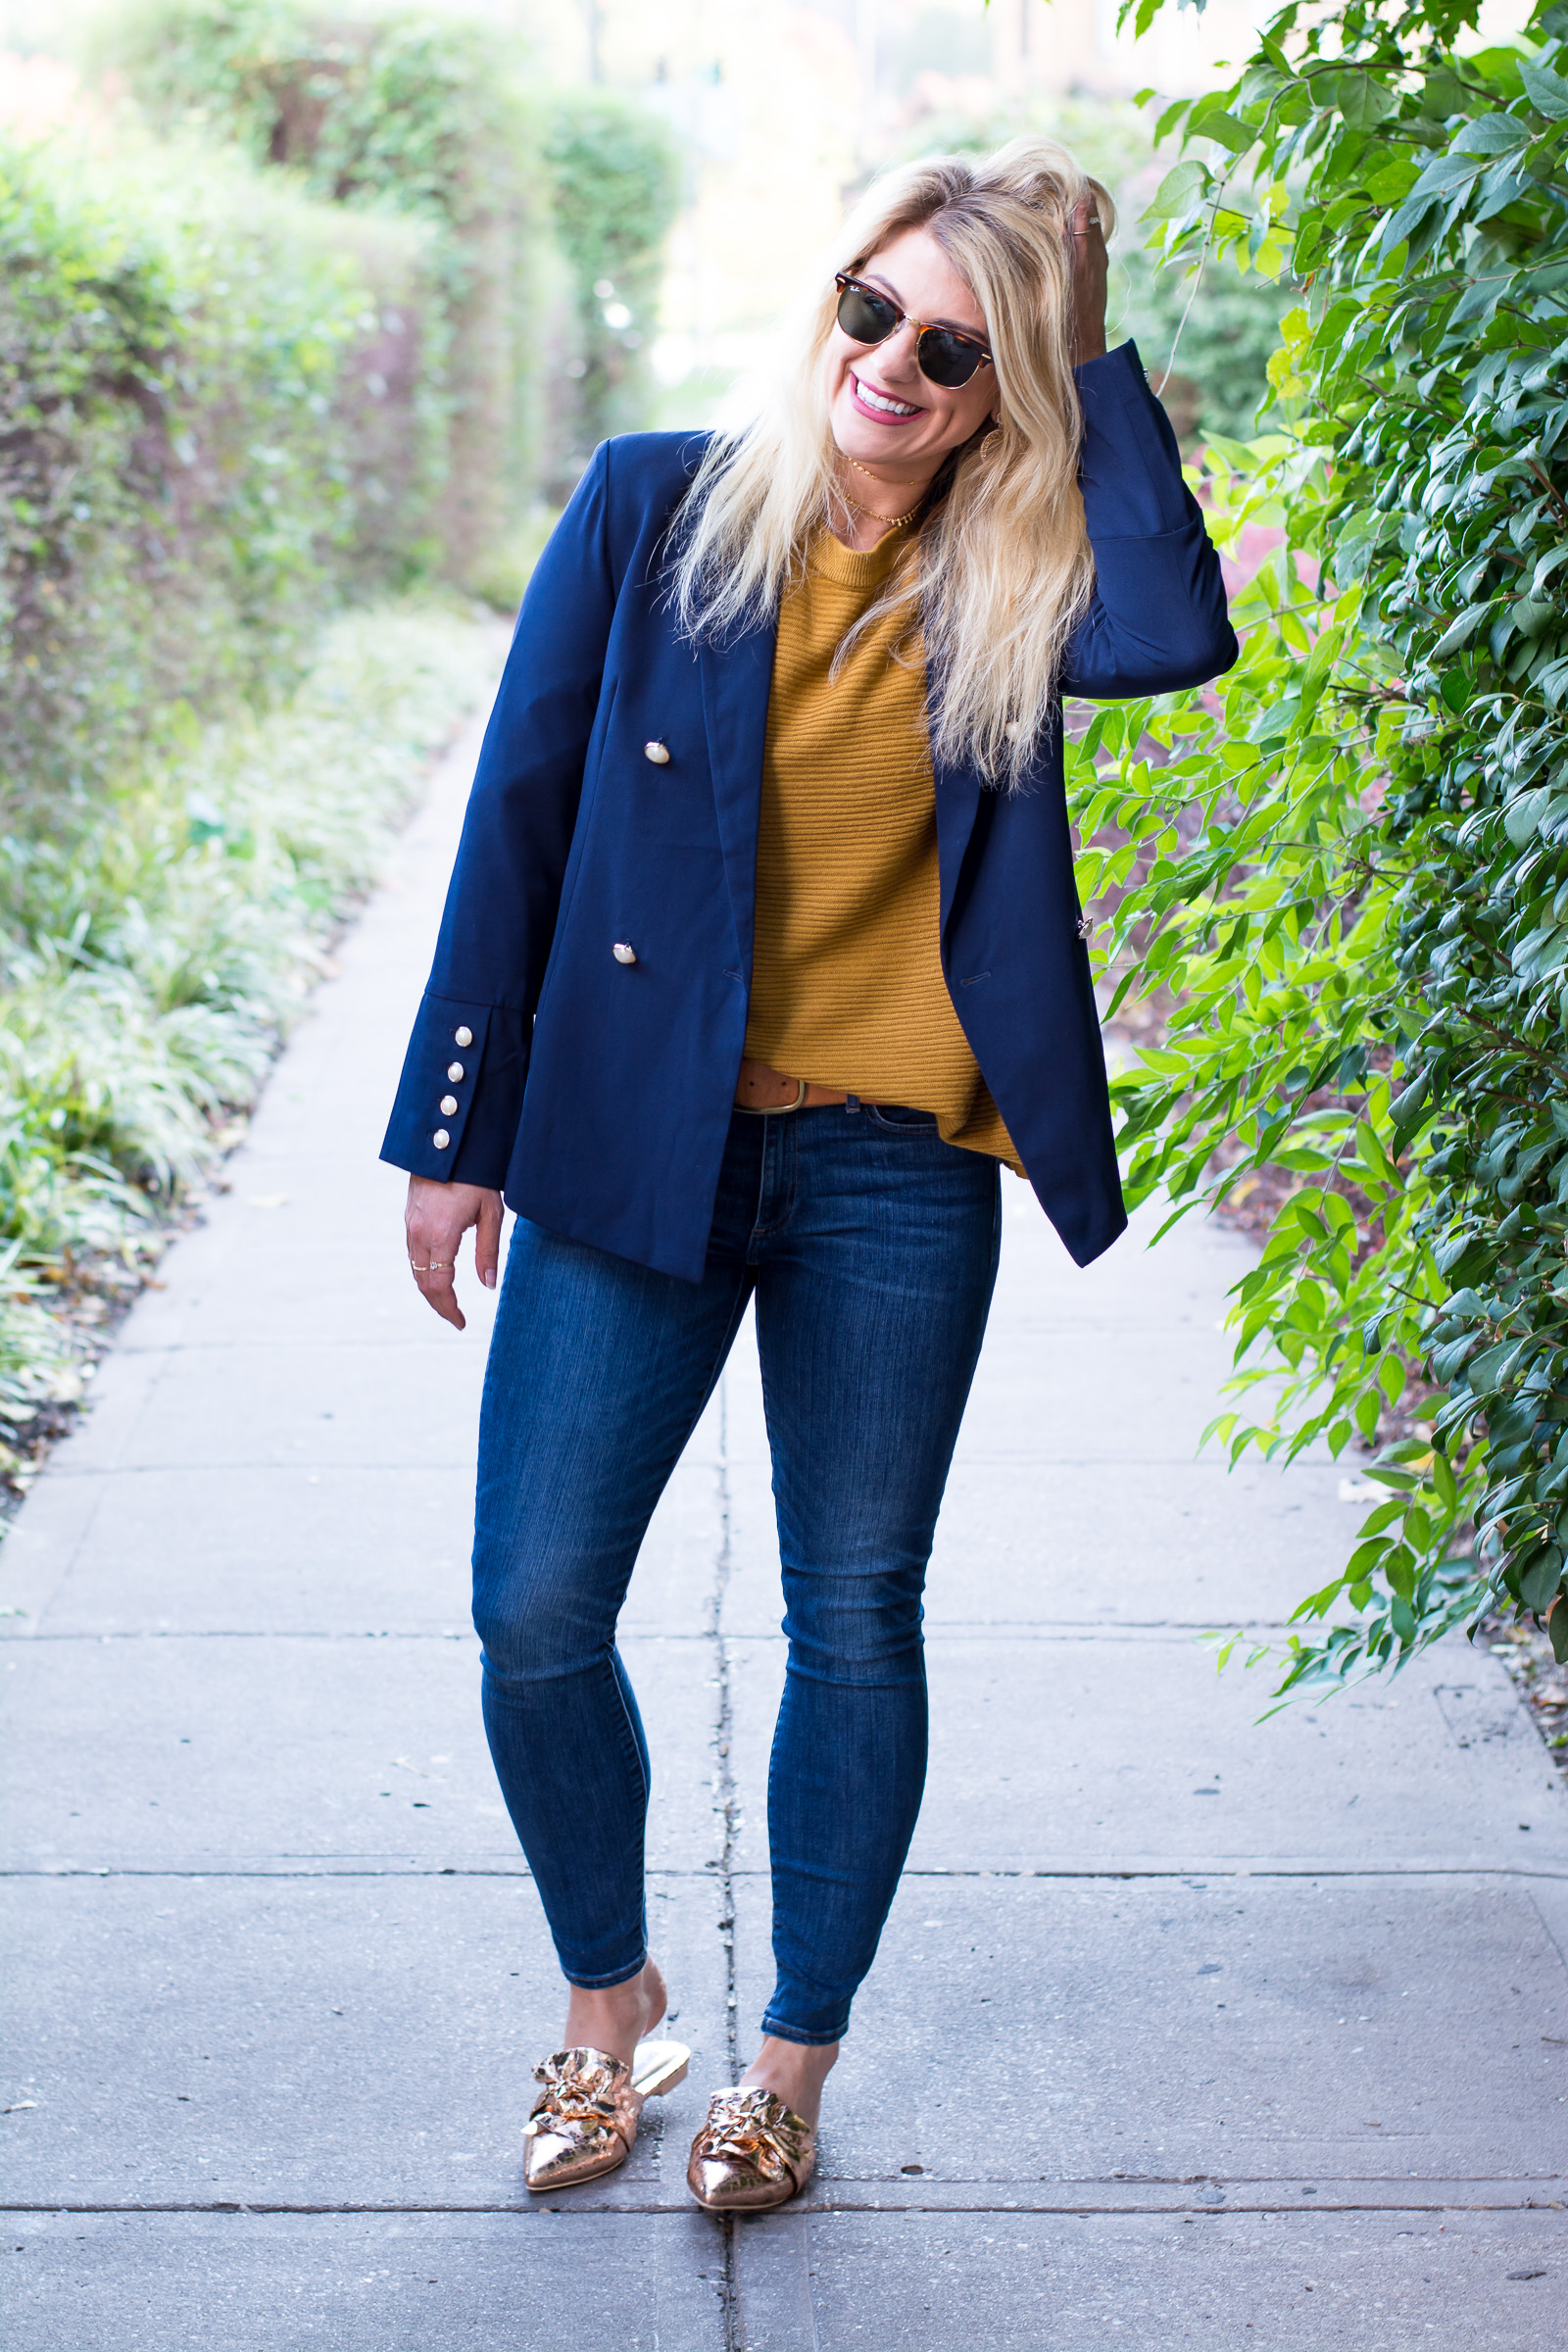 How to Remix Your Jeans and Sweater. | Ashley from LSR